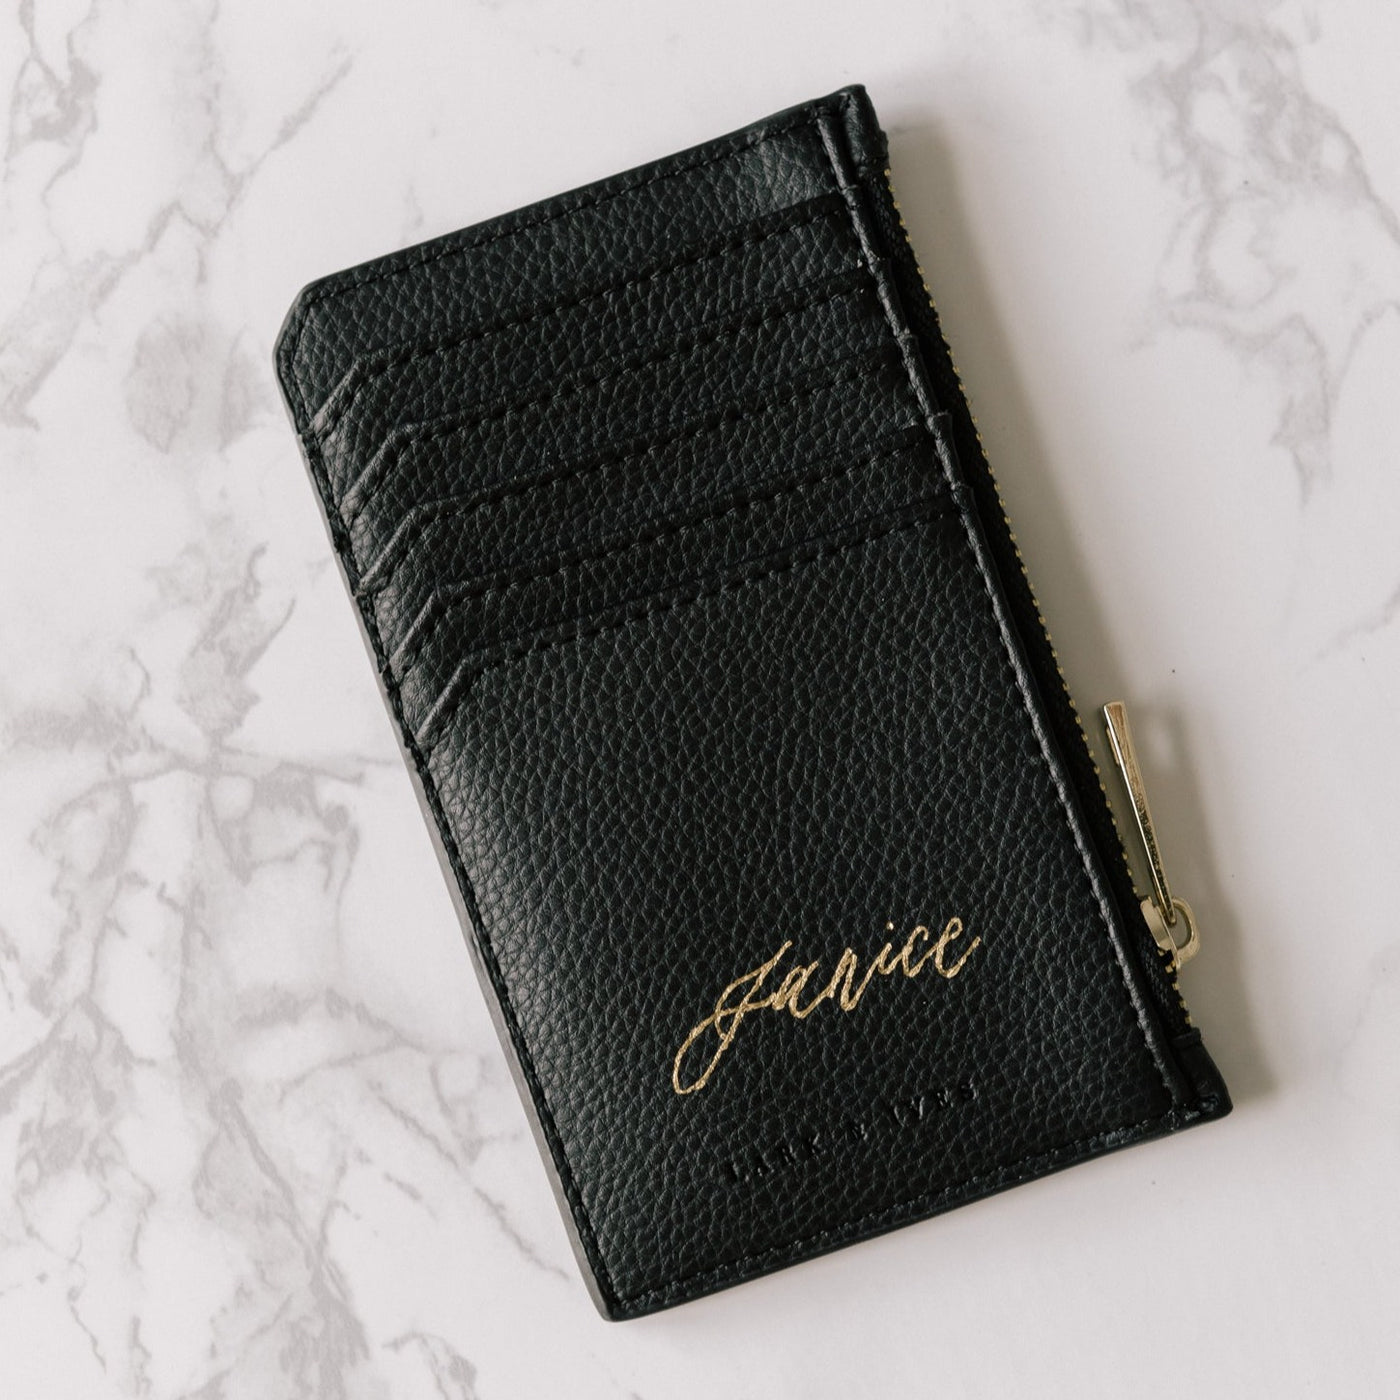 Lark and Ives / Vegan Leather Accessories / Small Accessories / Wallet / Mini Wallet / Card Case / Card Holder / Zippered Wallet / Zipper closure / Gold Foil Personalized Card Holder